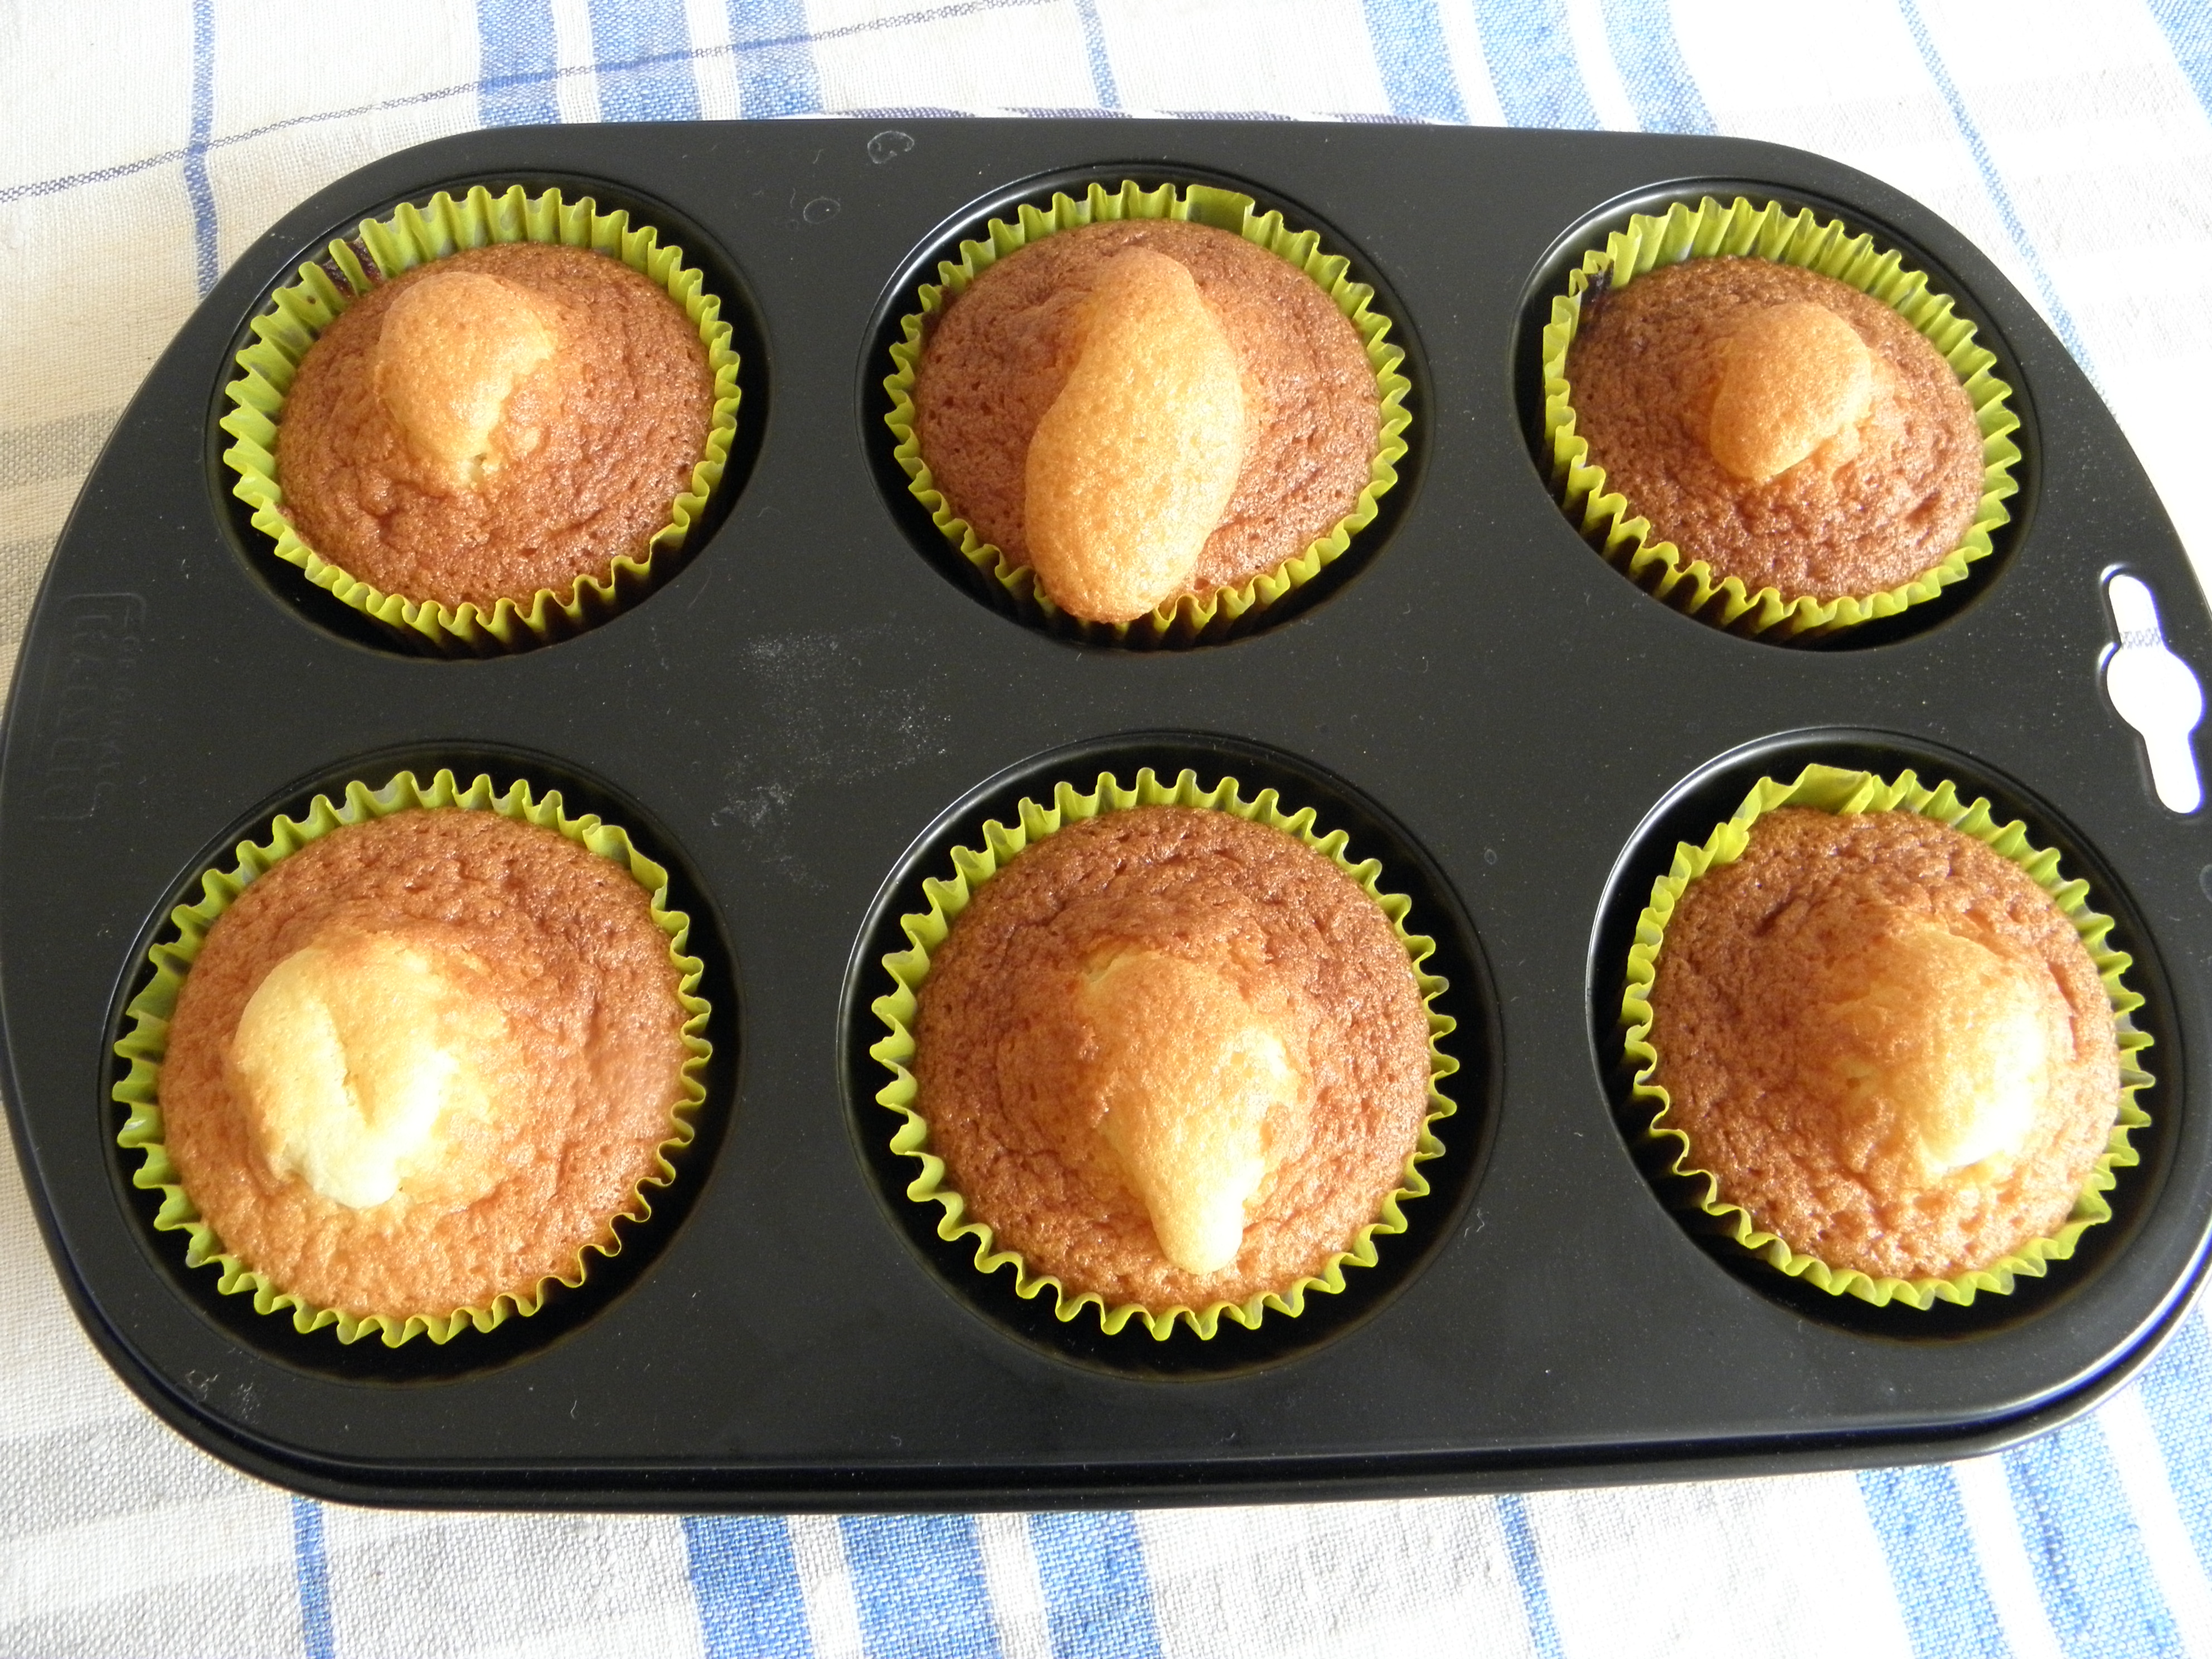 Cupcakes after baking